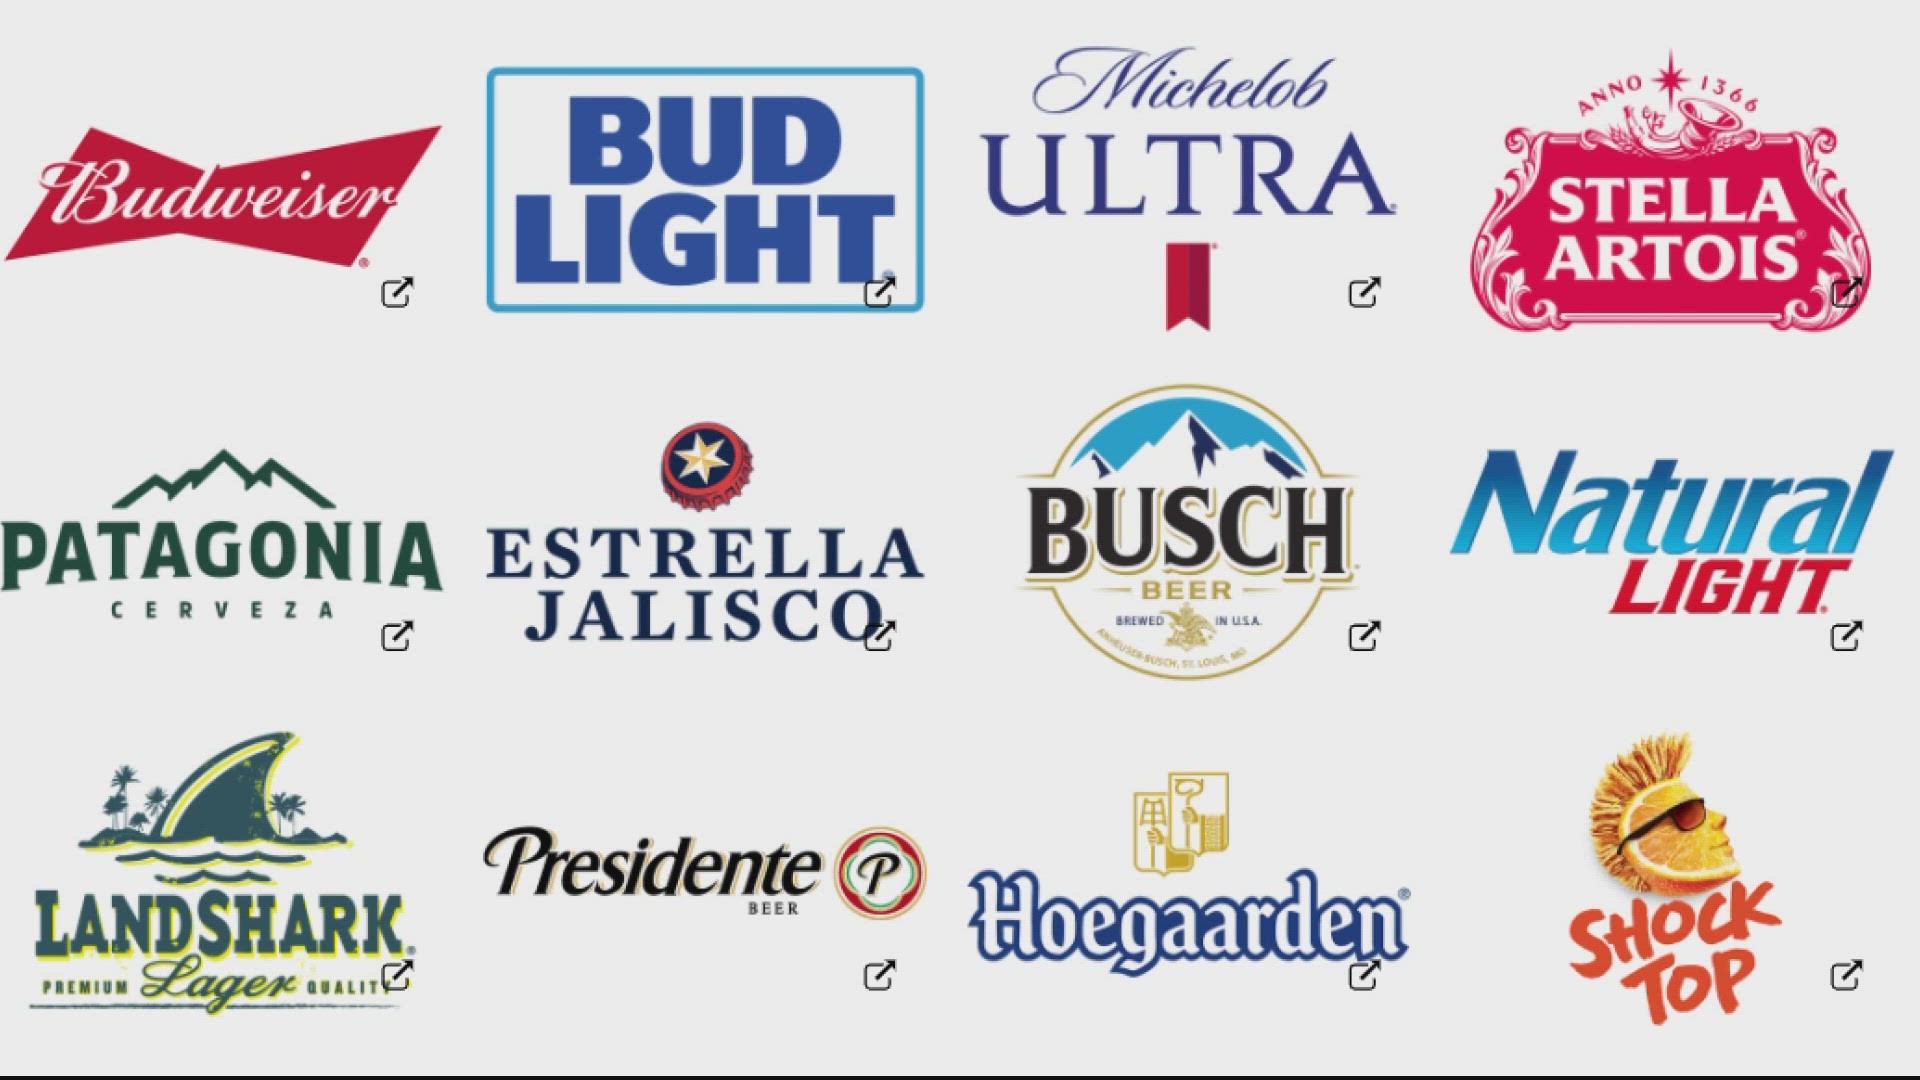 As part of the deal, Anheuser-Busch will become the "Official Beer Sponsor" for the team.